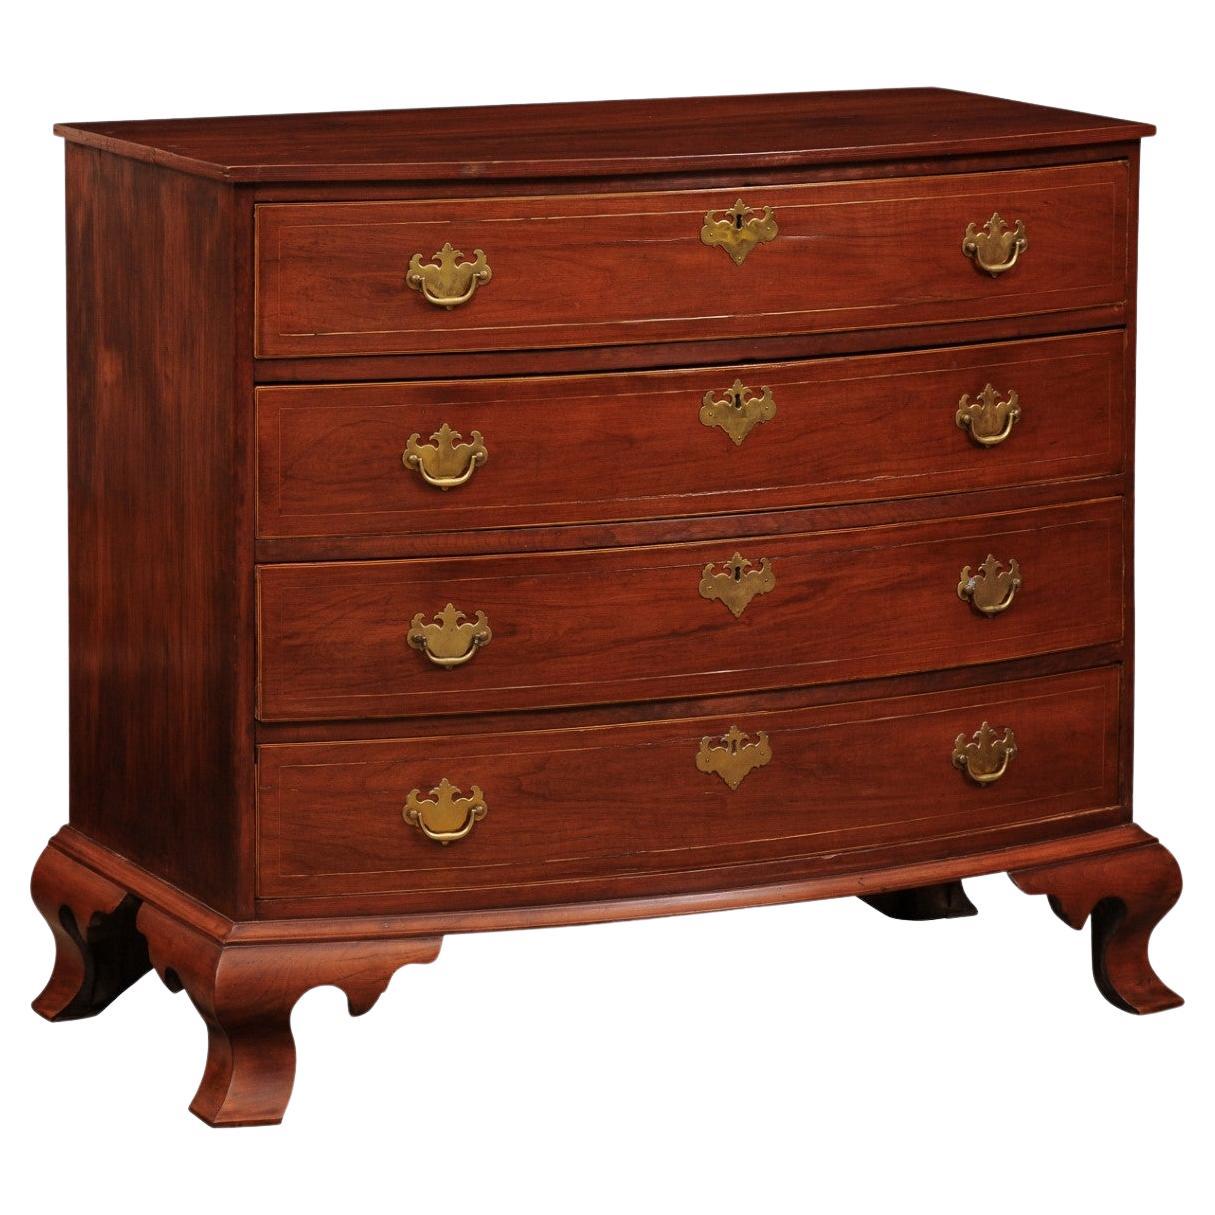  New England Cherry Bowfront Chest with Graduating 4 Drawers, String Inlay  For Sale